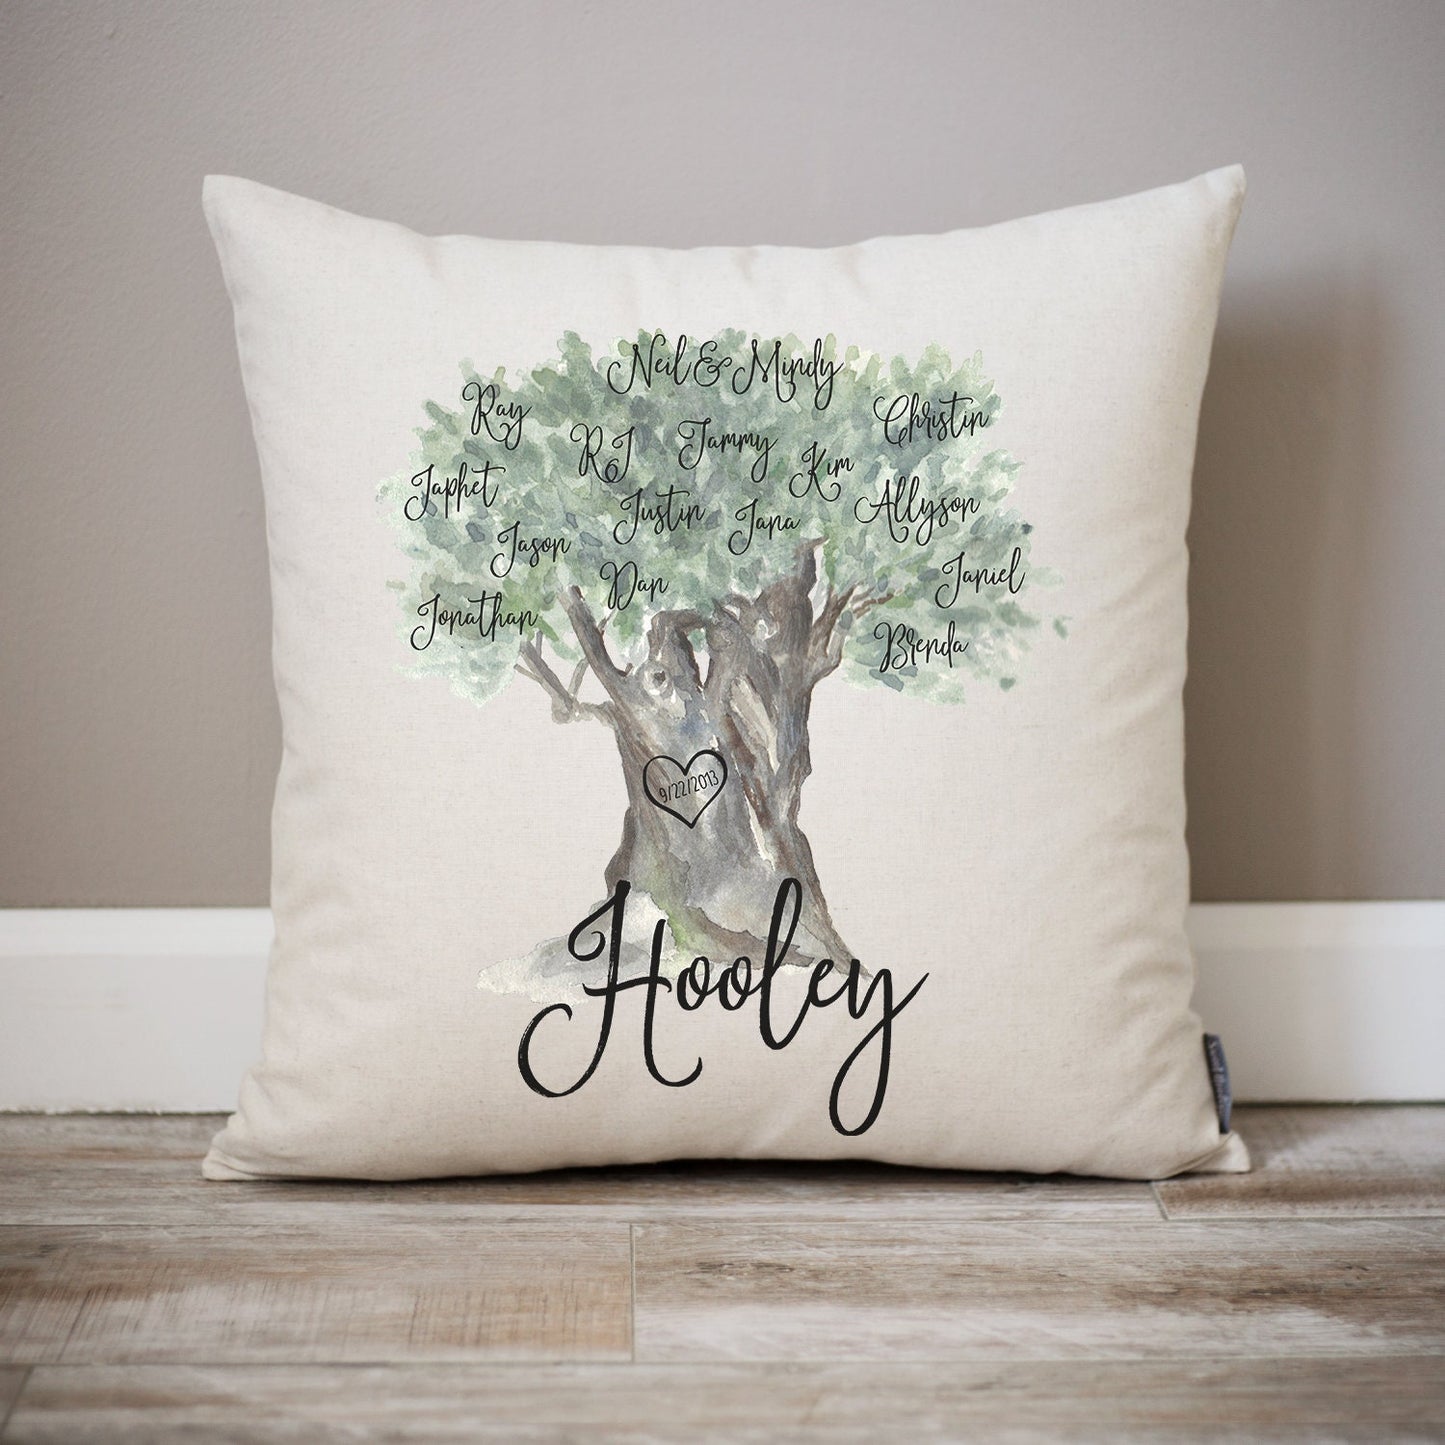 Load image into Gallery viewer, Wedding Party Tree | Bridal Party Tree | Wedding Gift | Wedding Gifts for Couple | Bridal Shower Gift for Husband | Gift for Bride and Groom
